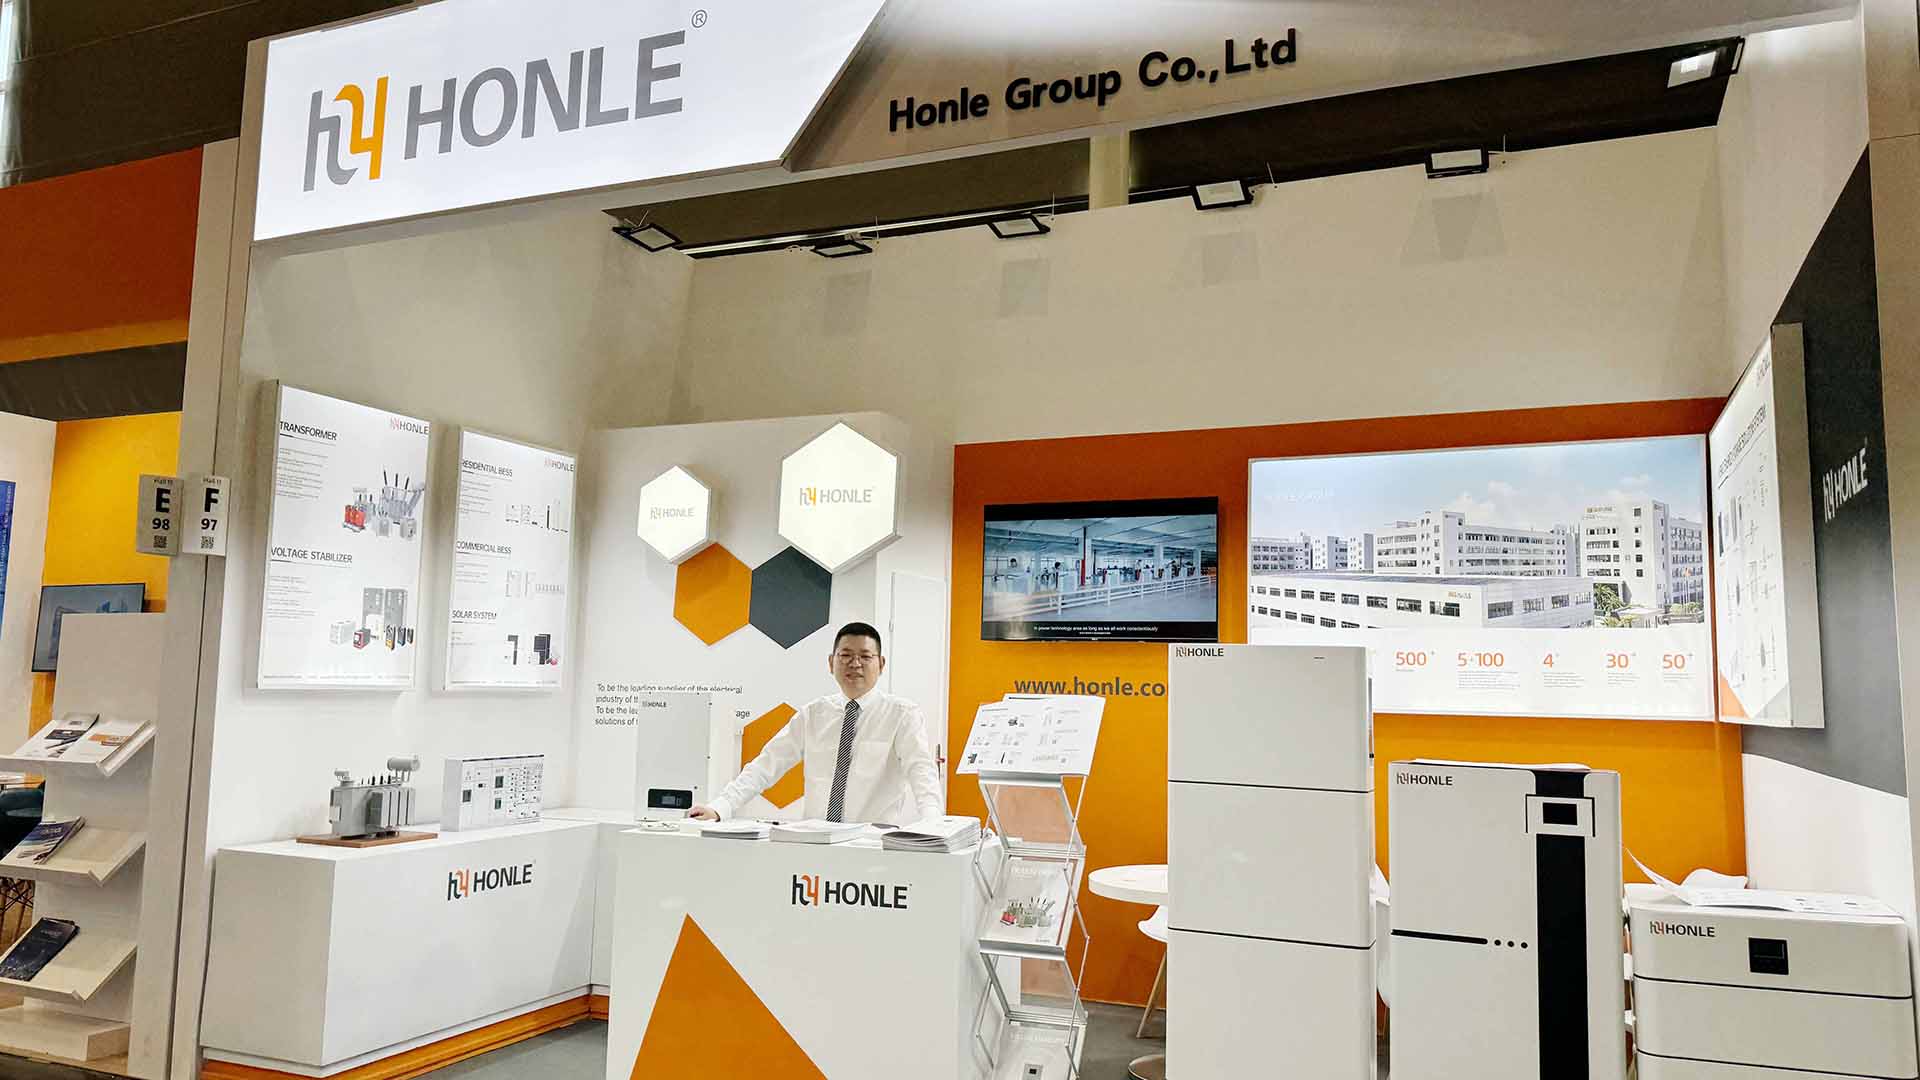 Departure to Europe | Honle Group Shines at Hannover Messe in Germany